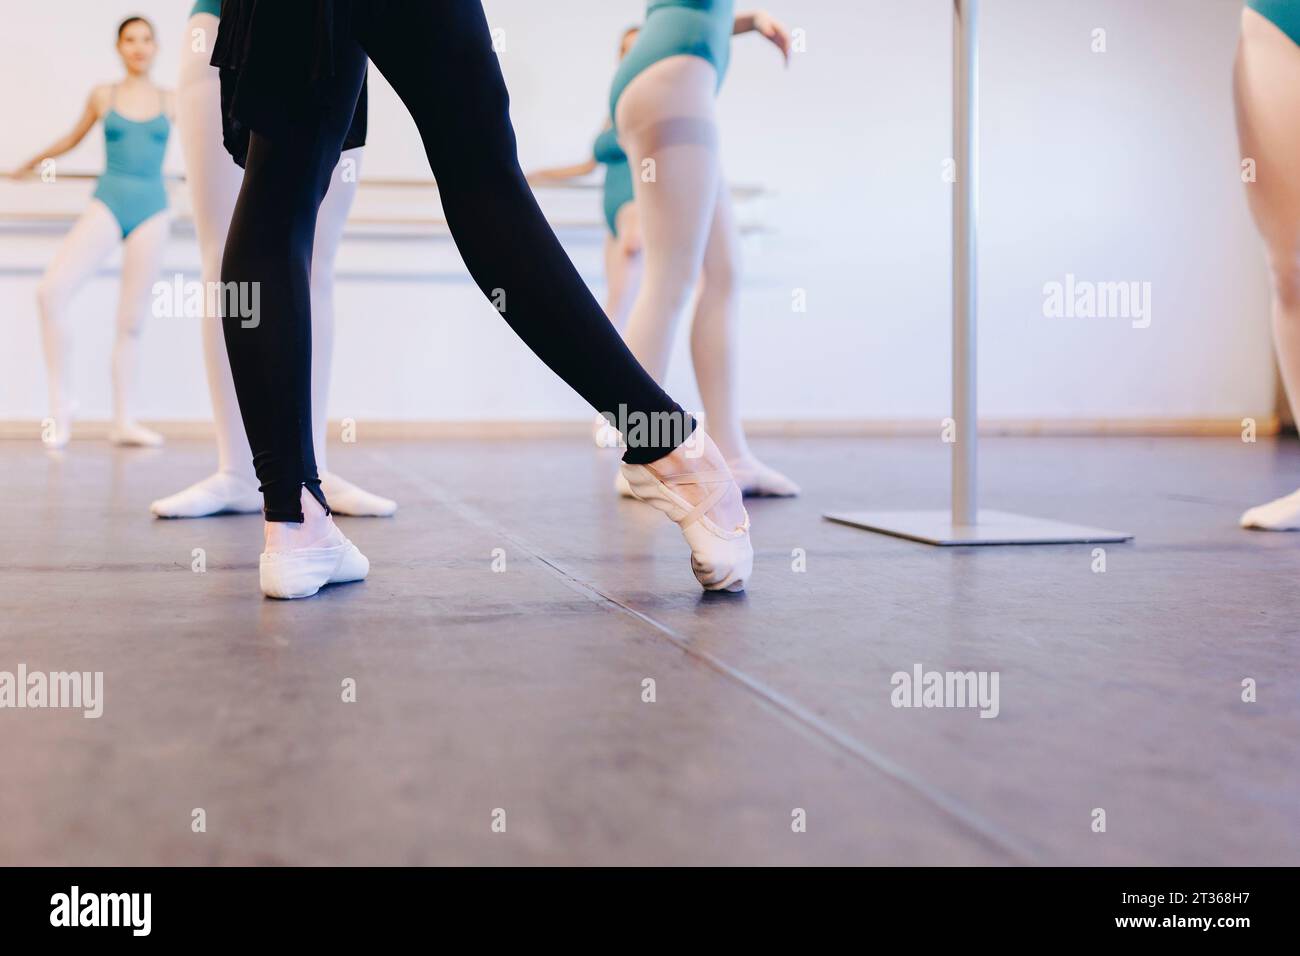 Instructor wearing ballet shoes teaching students in dance school Stock Photo